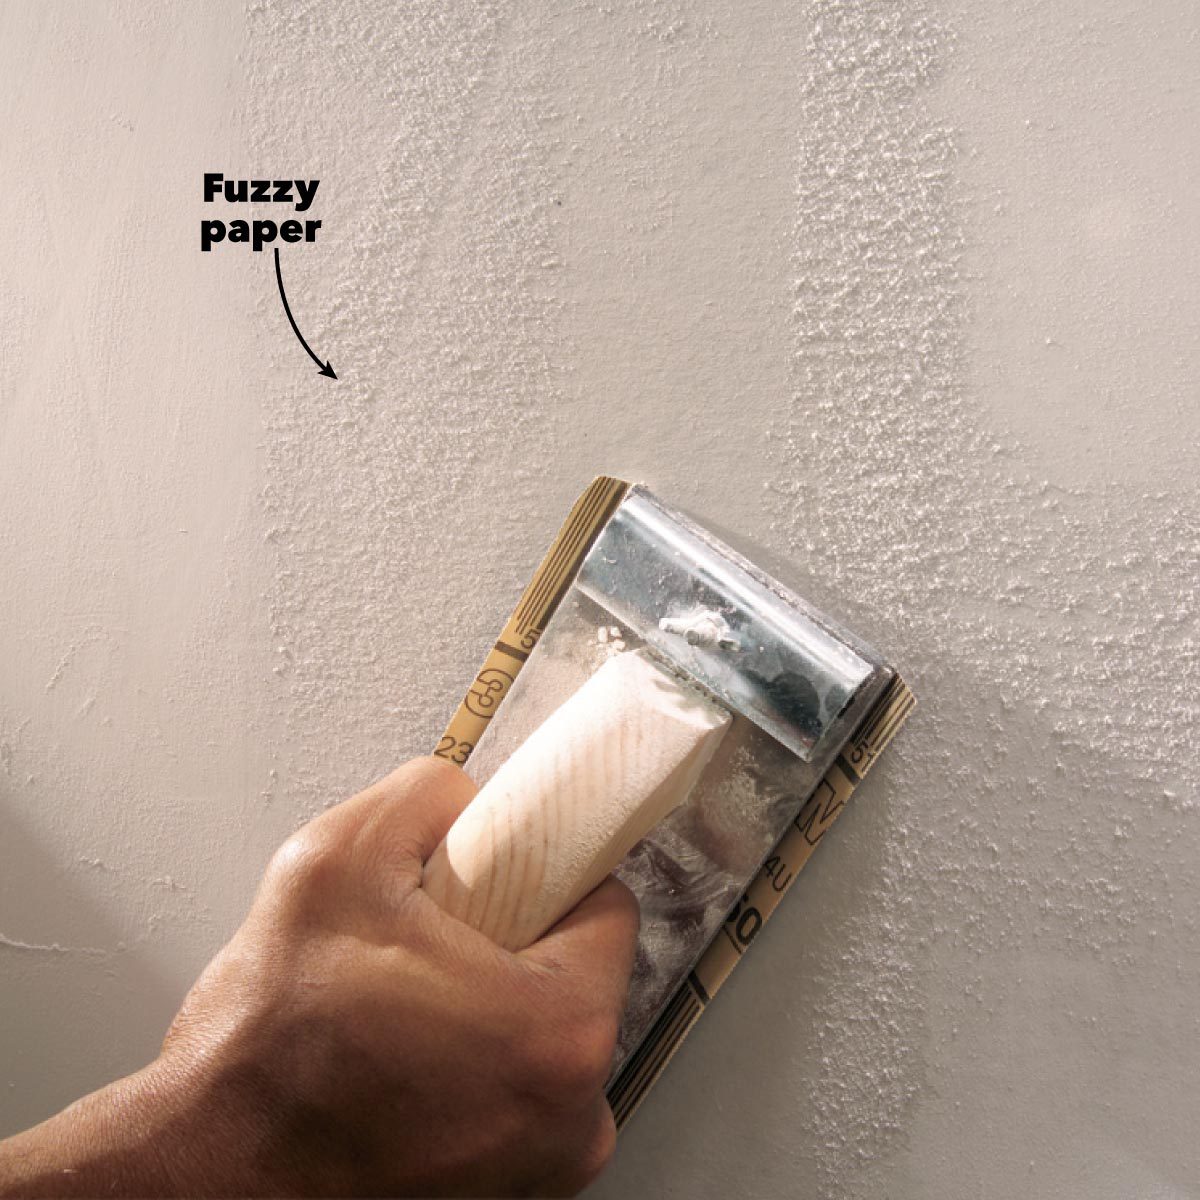 drywall sanding prime walls fuzzy paper